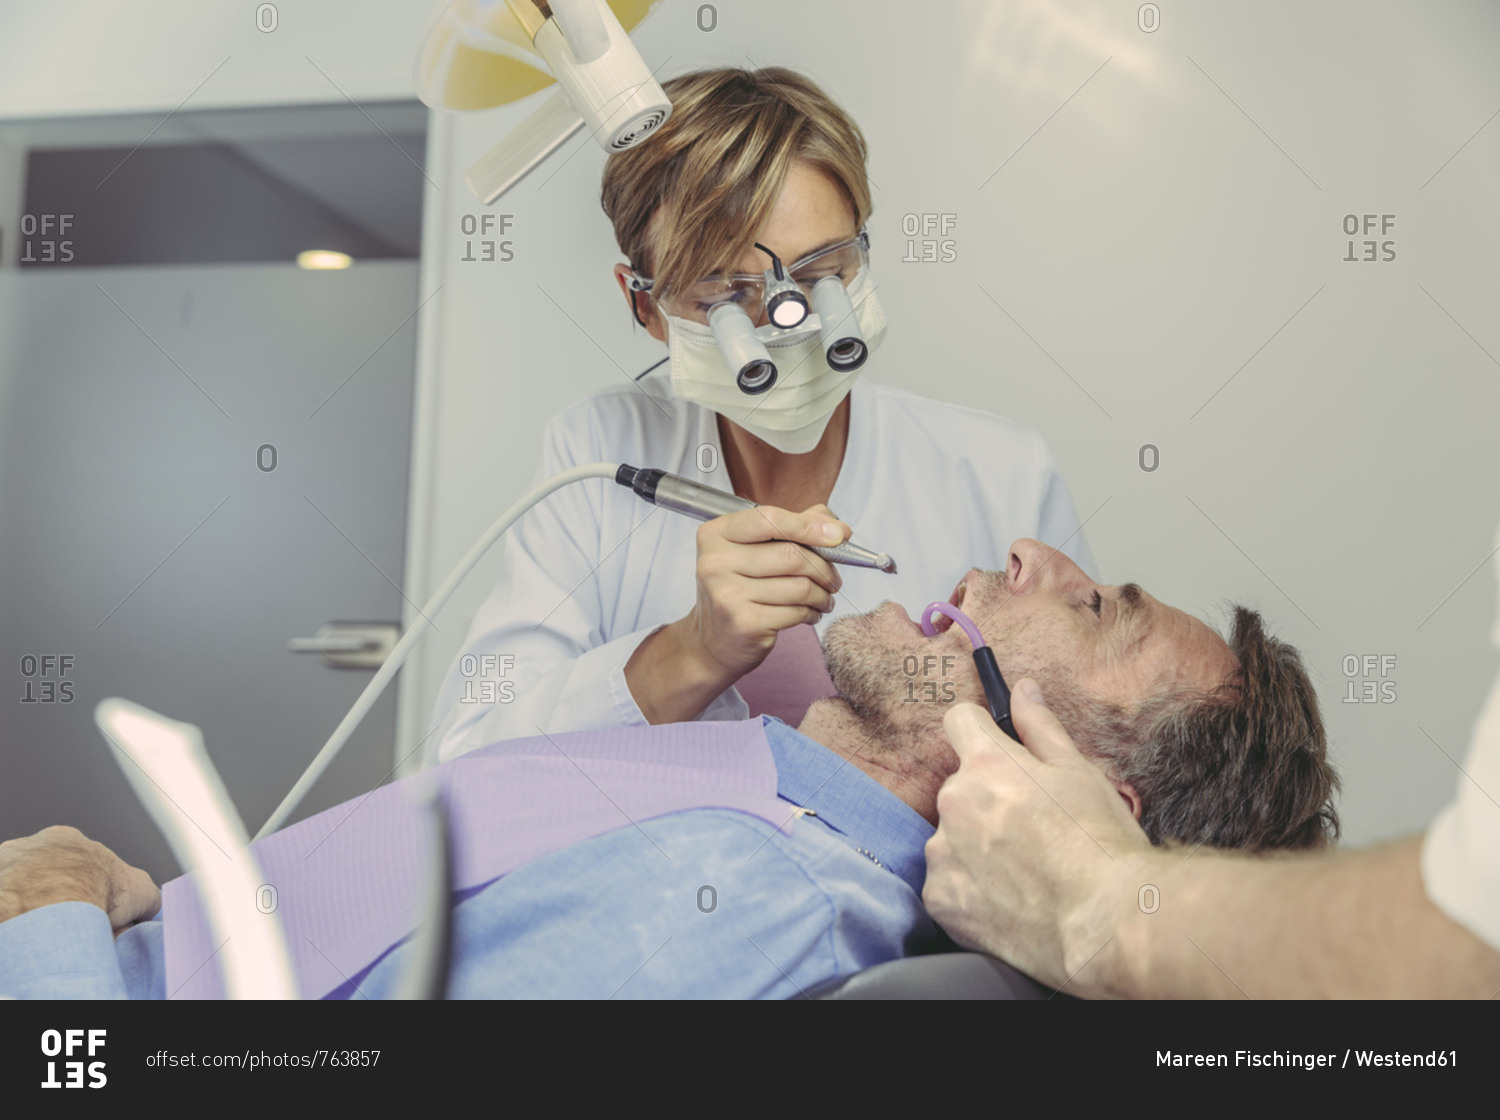 Patient getting dental treatment- dentist using dental drill and head magnifiers and light